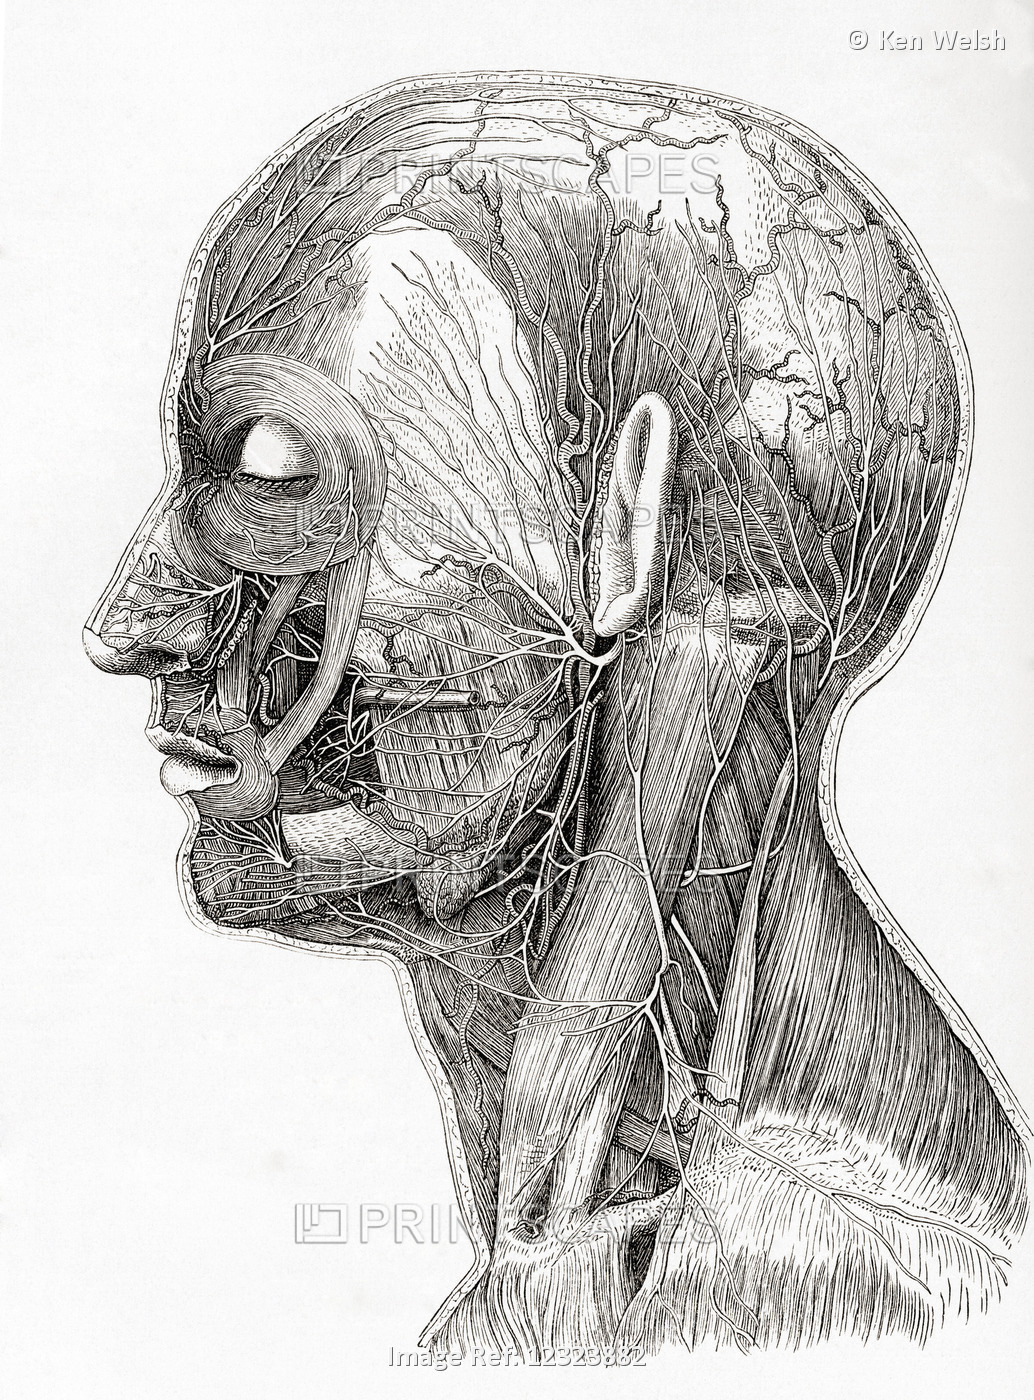 Diagram Showing The Superficial Nerves Of The Human Head And Neck. From Meyers ...